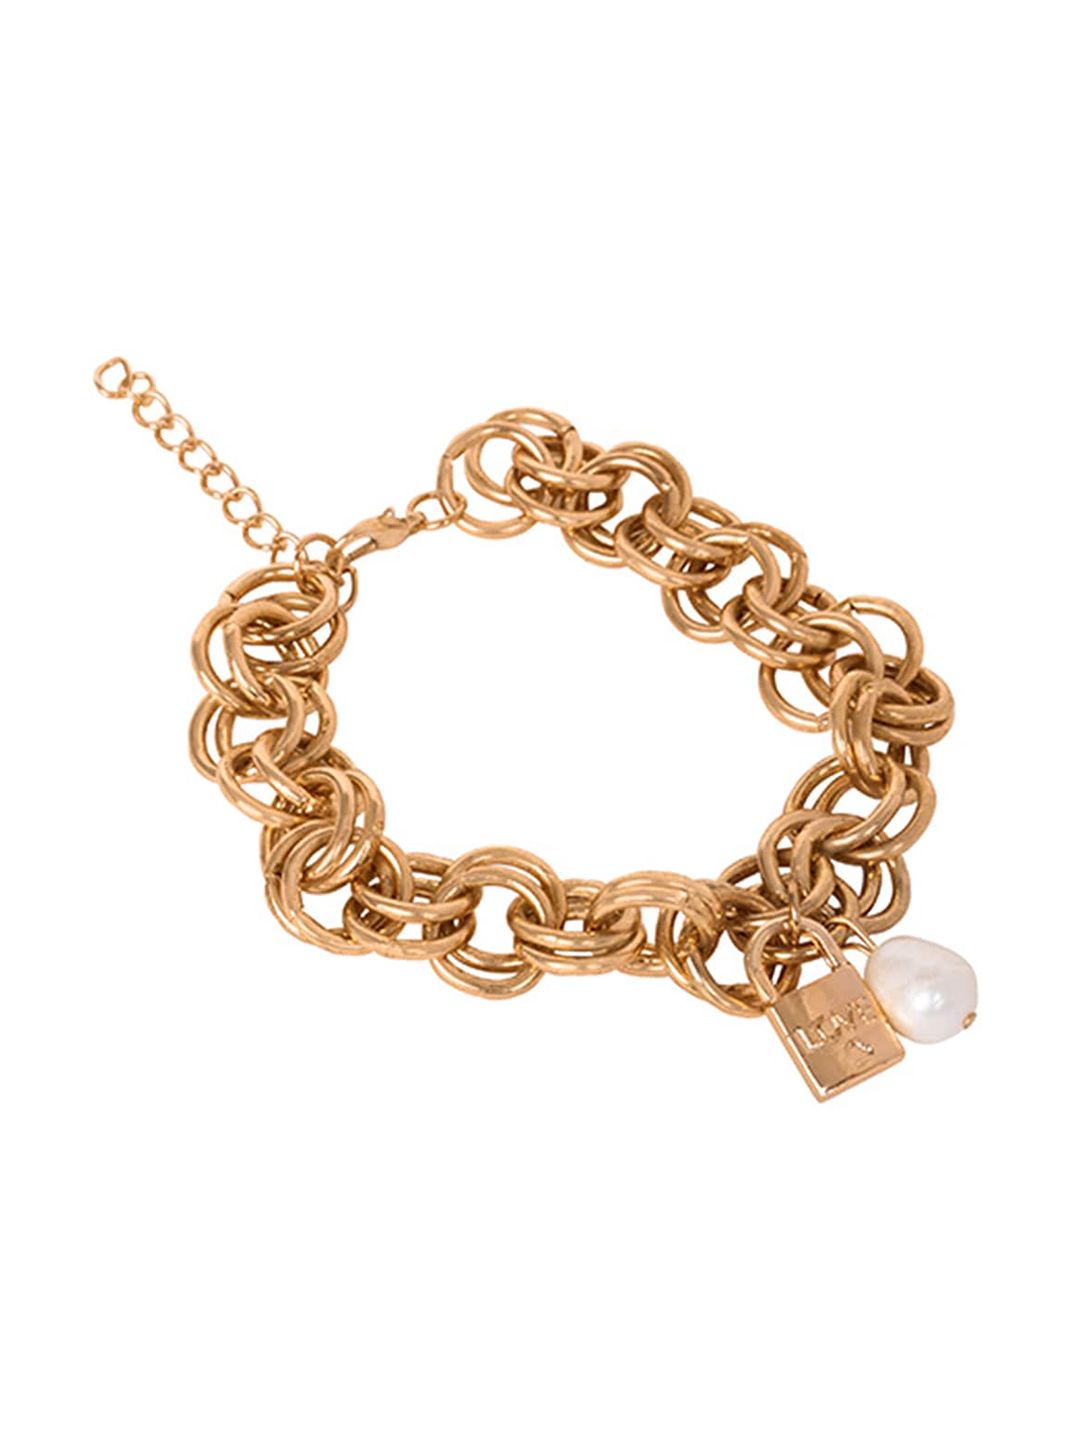 FabAlley Women Gold-Toned & White Gold-Plated Charm Bracelet Price in India